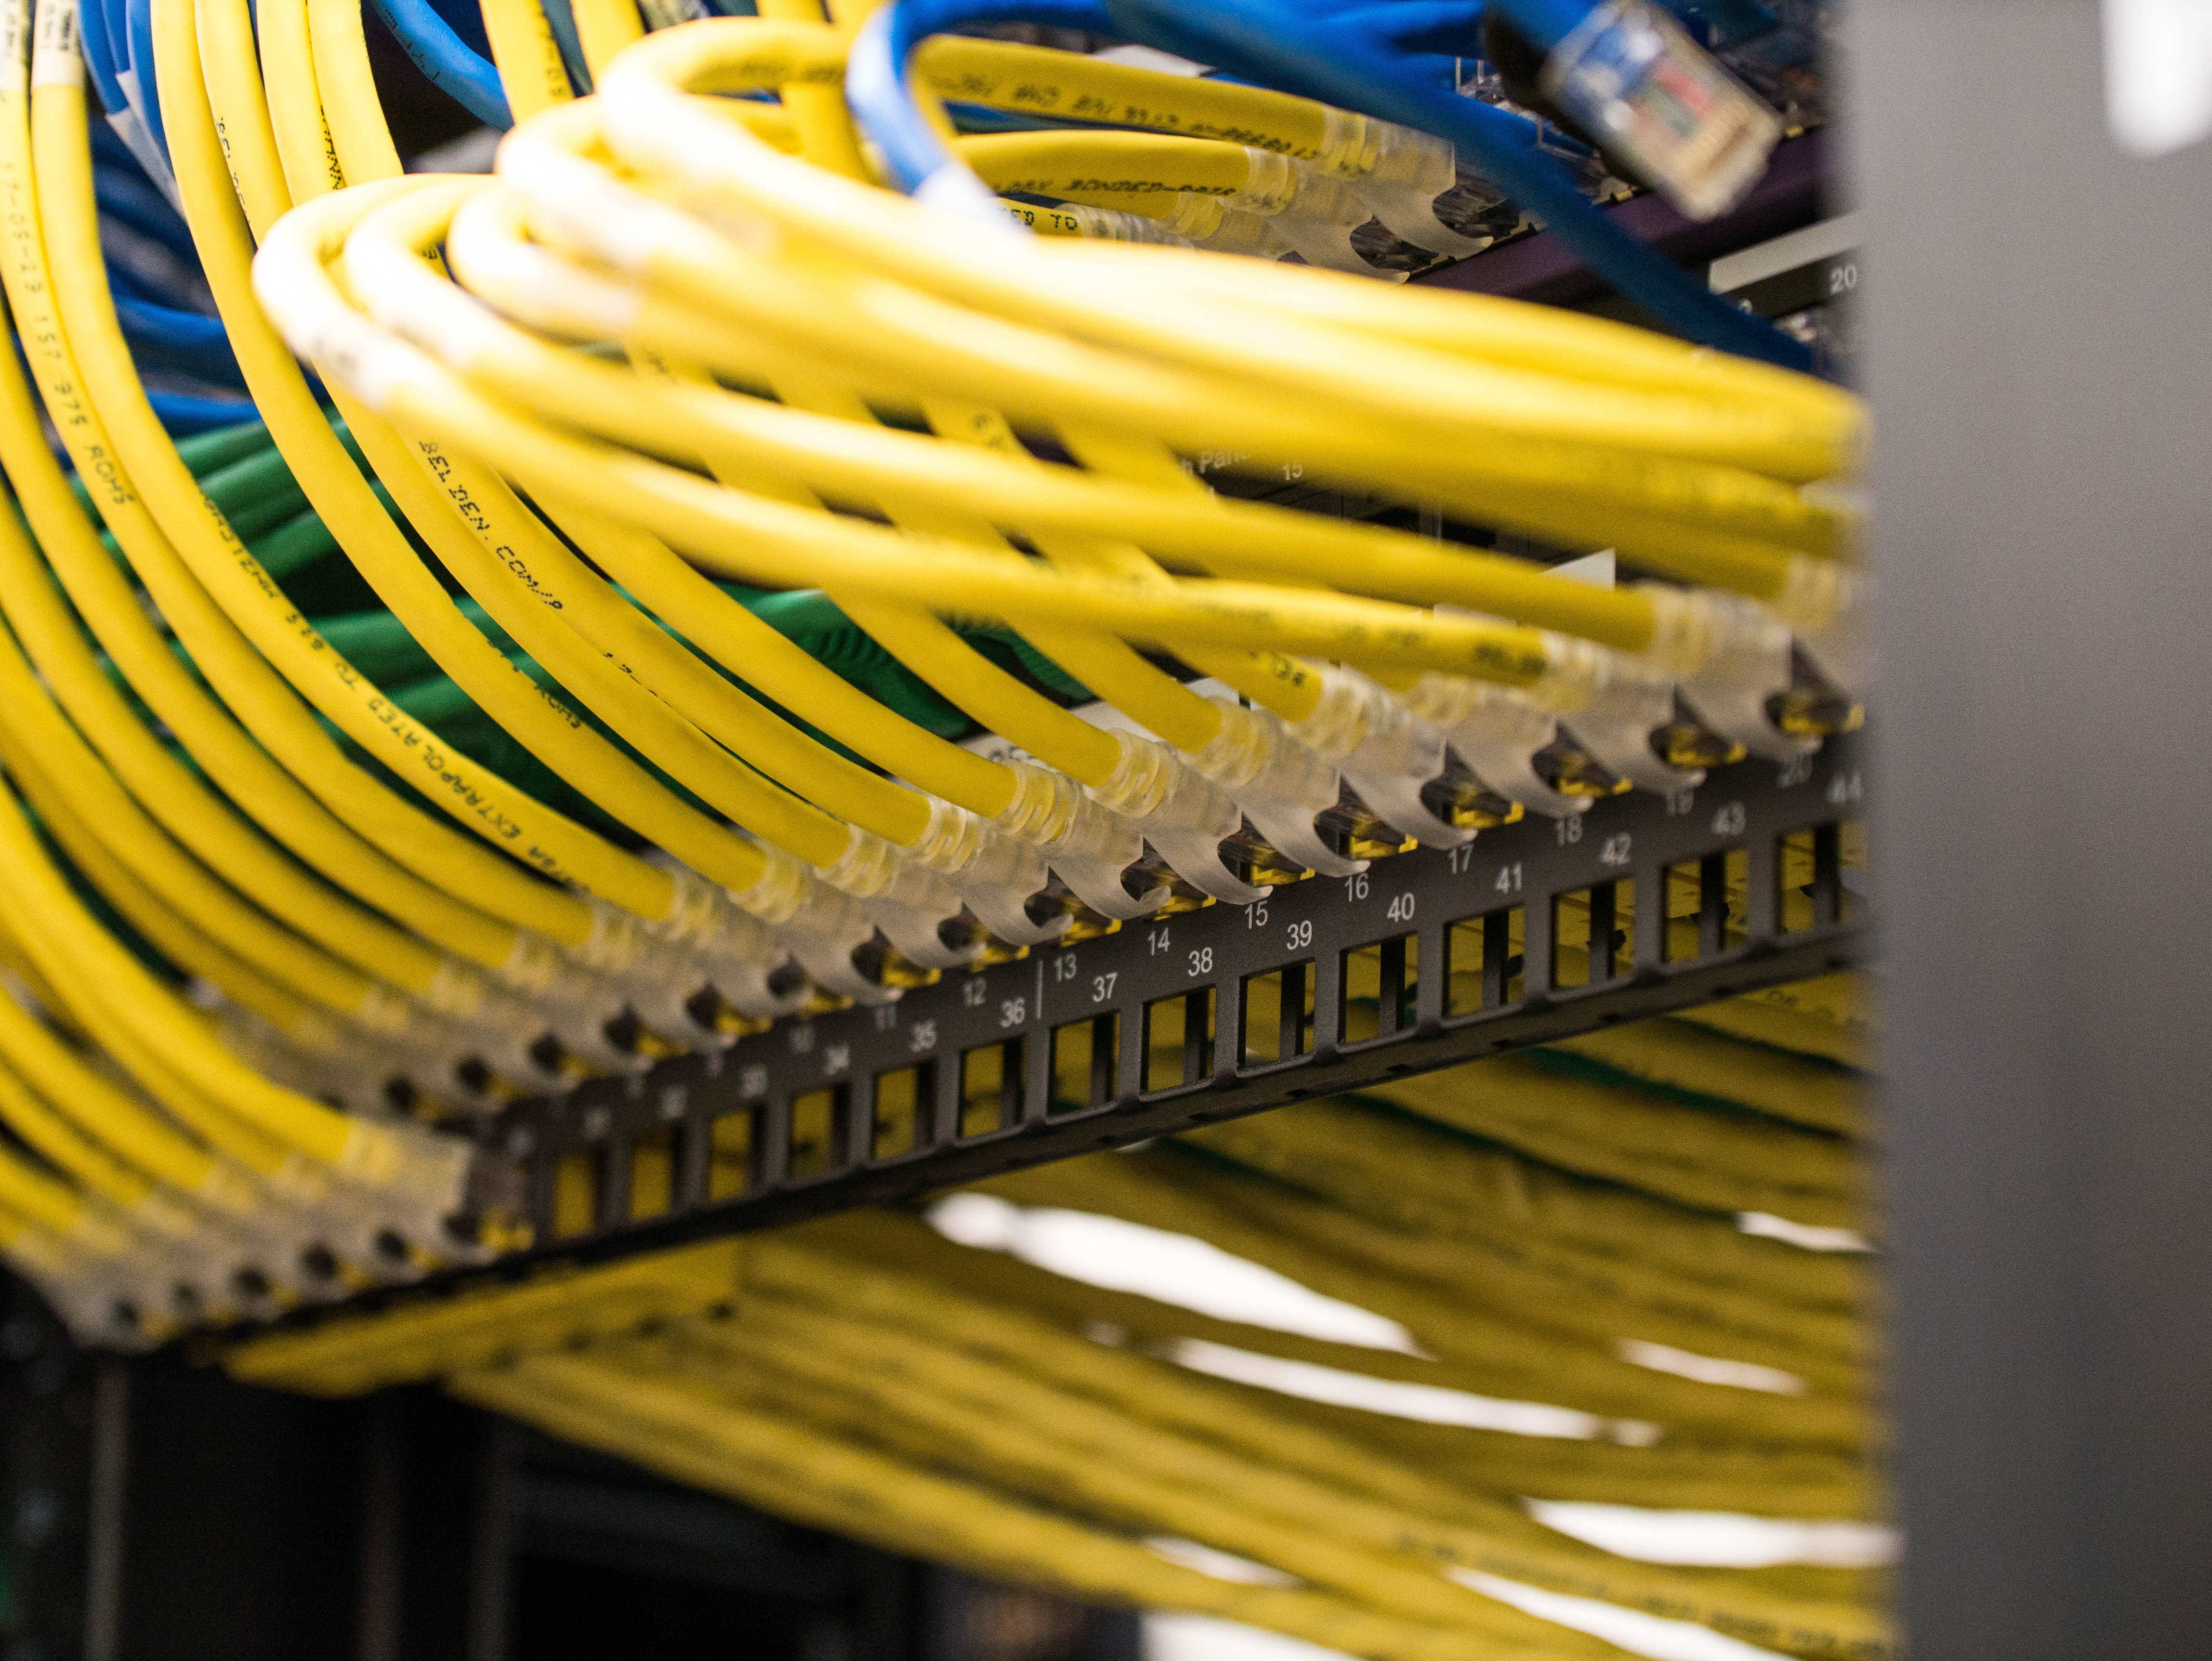 Forsyth County School case study cabling infrastructure